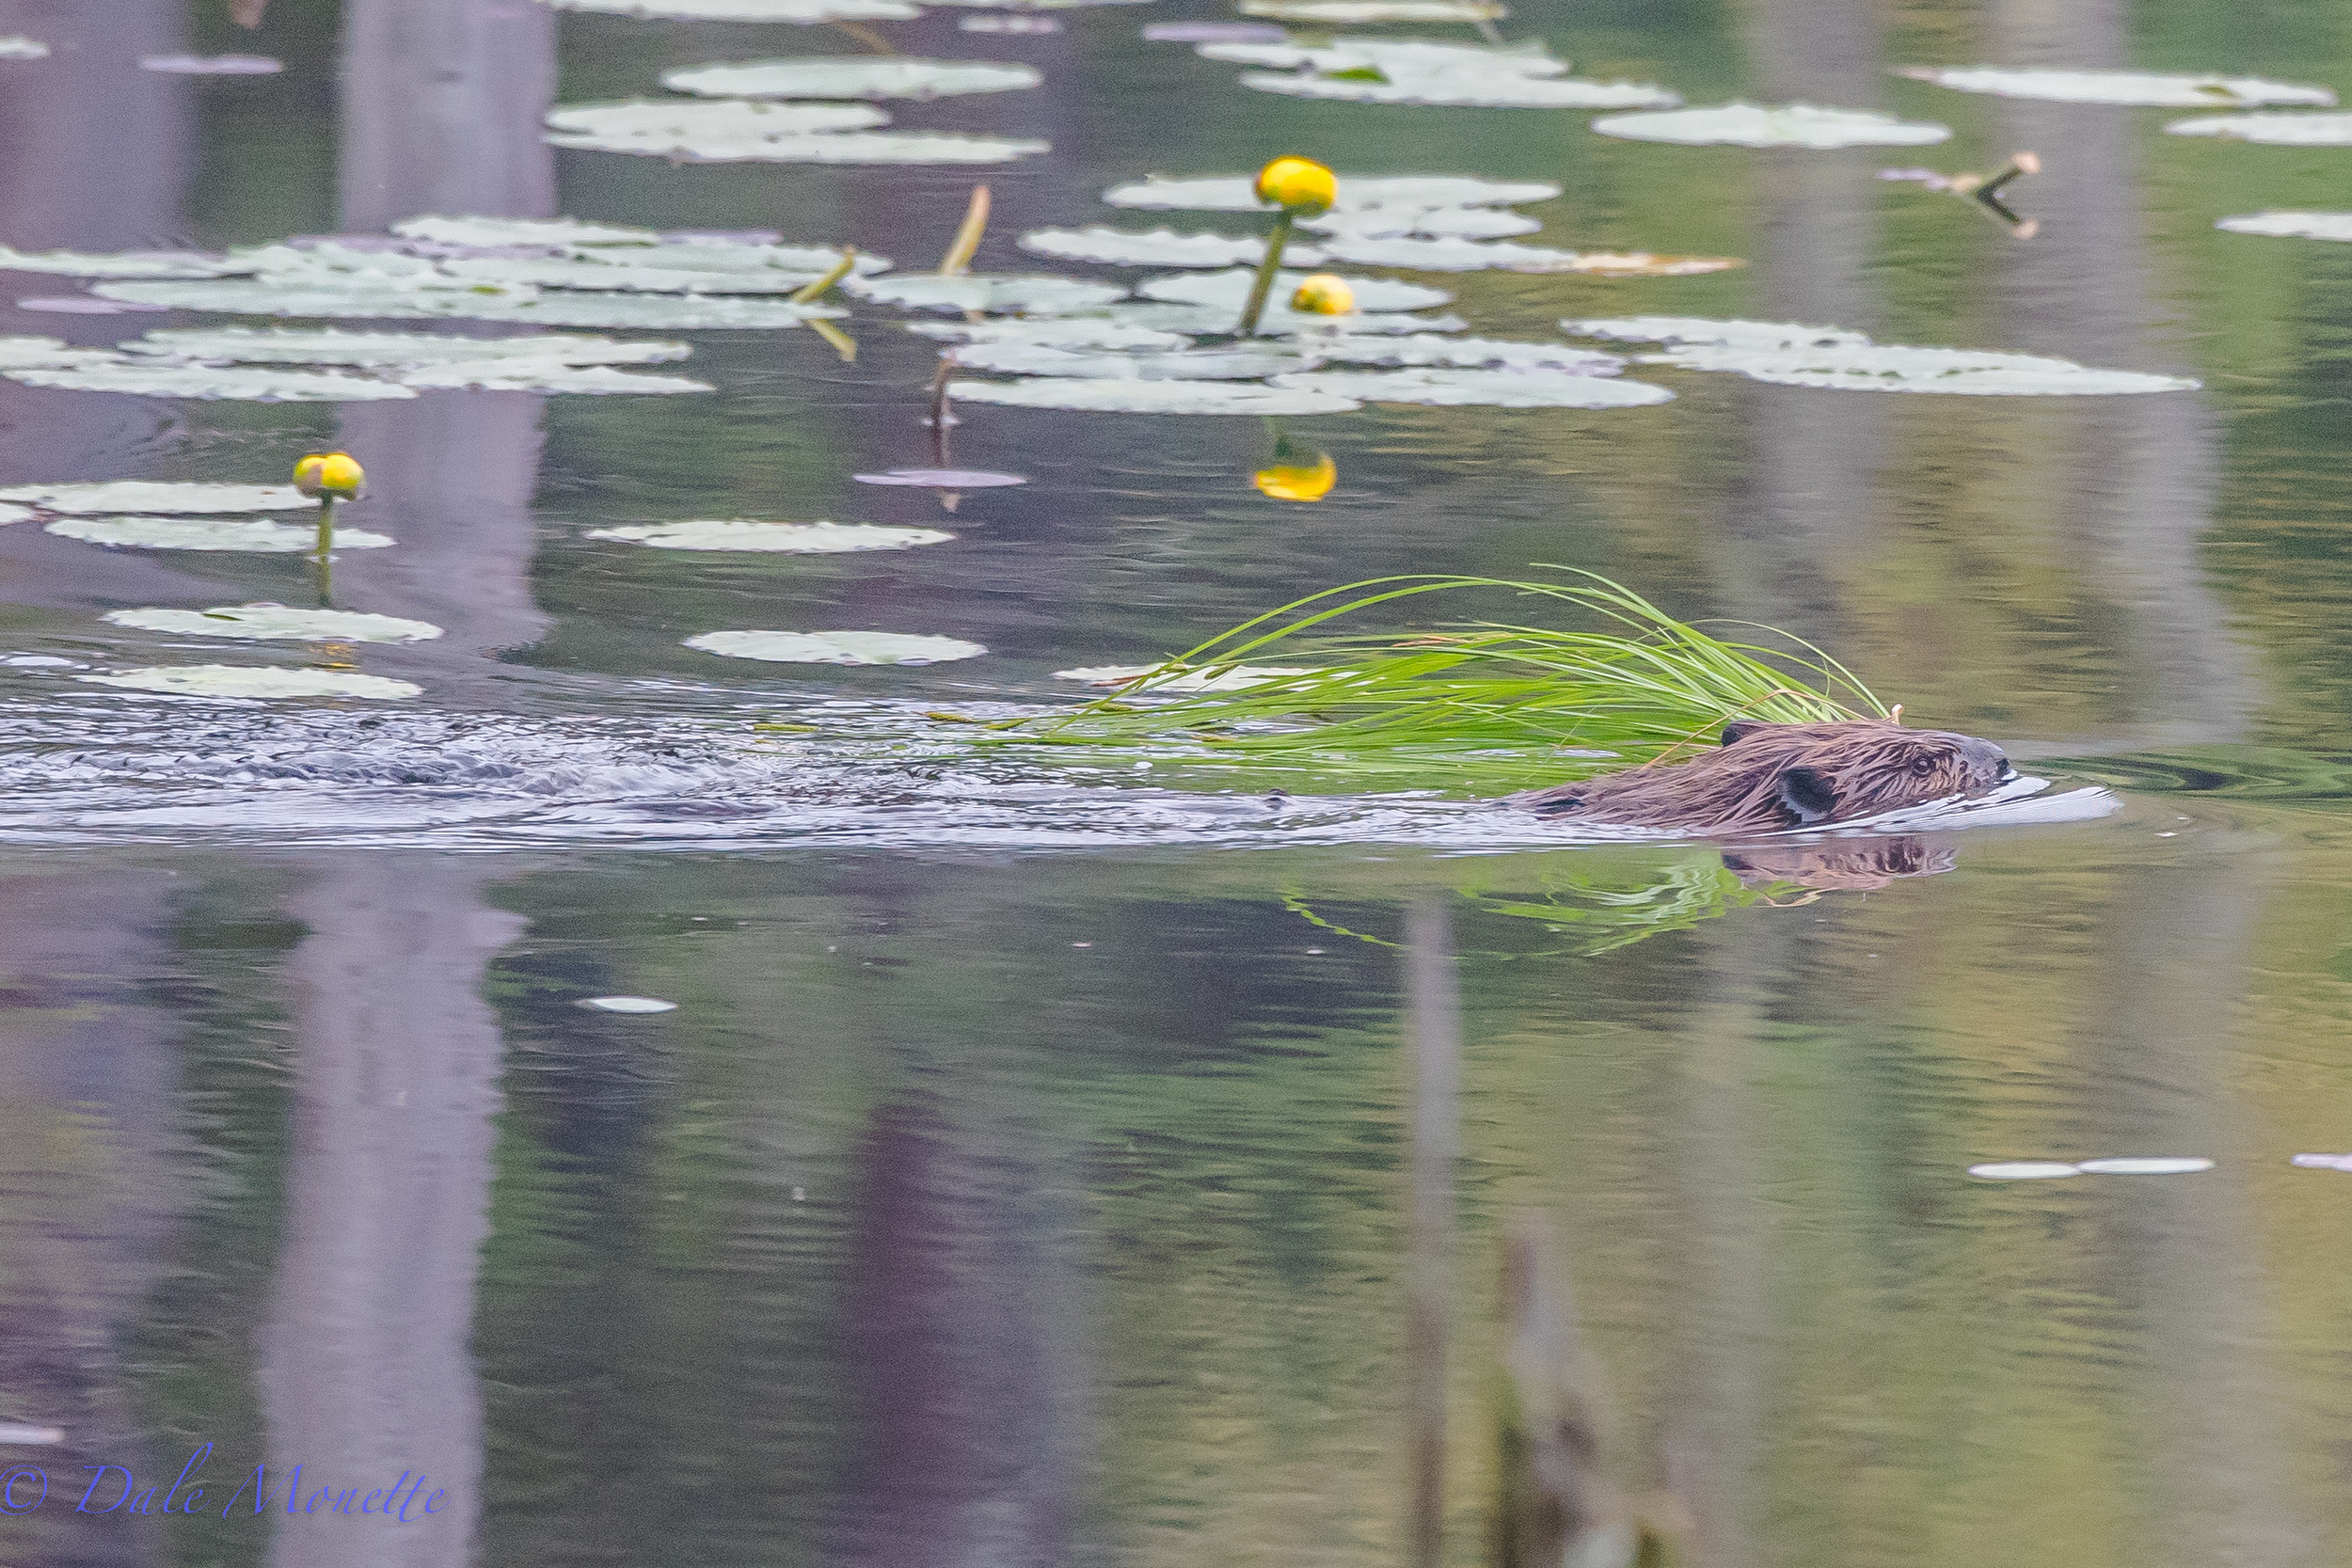   Heres a young beaver pulling a load of fresh grass back to the lodge for his younger brothers or sisters to sleep on. The kits should be making their first foray out into the big world soon. 5/25/16  